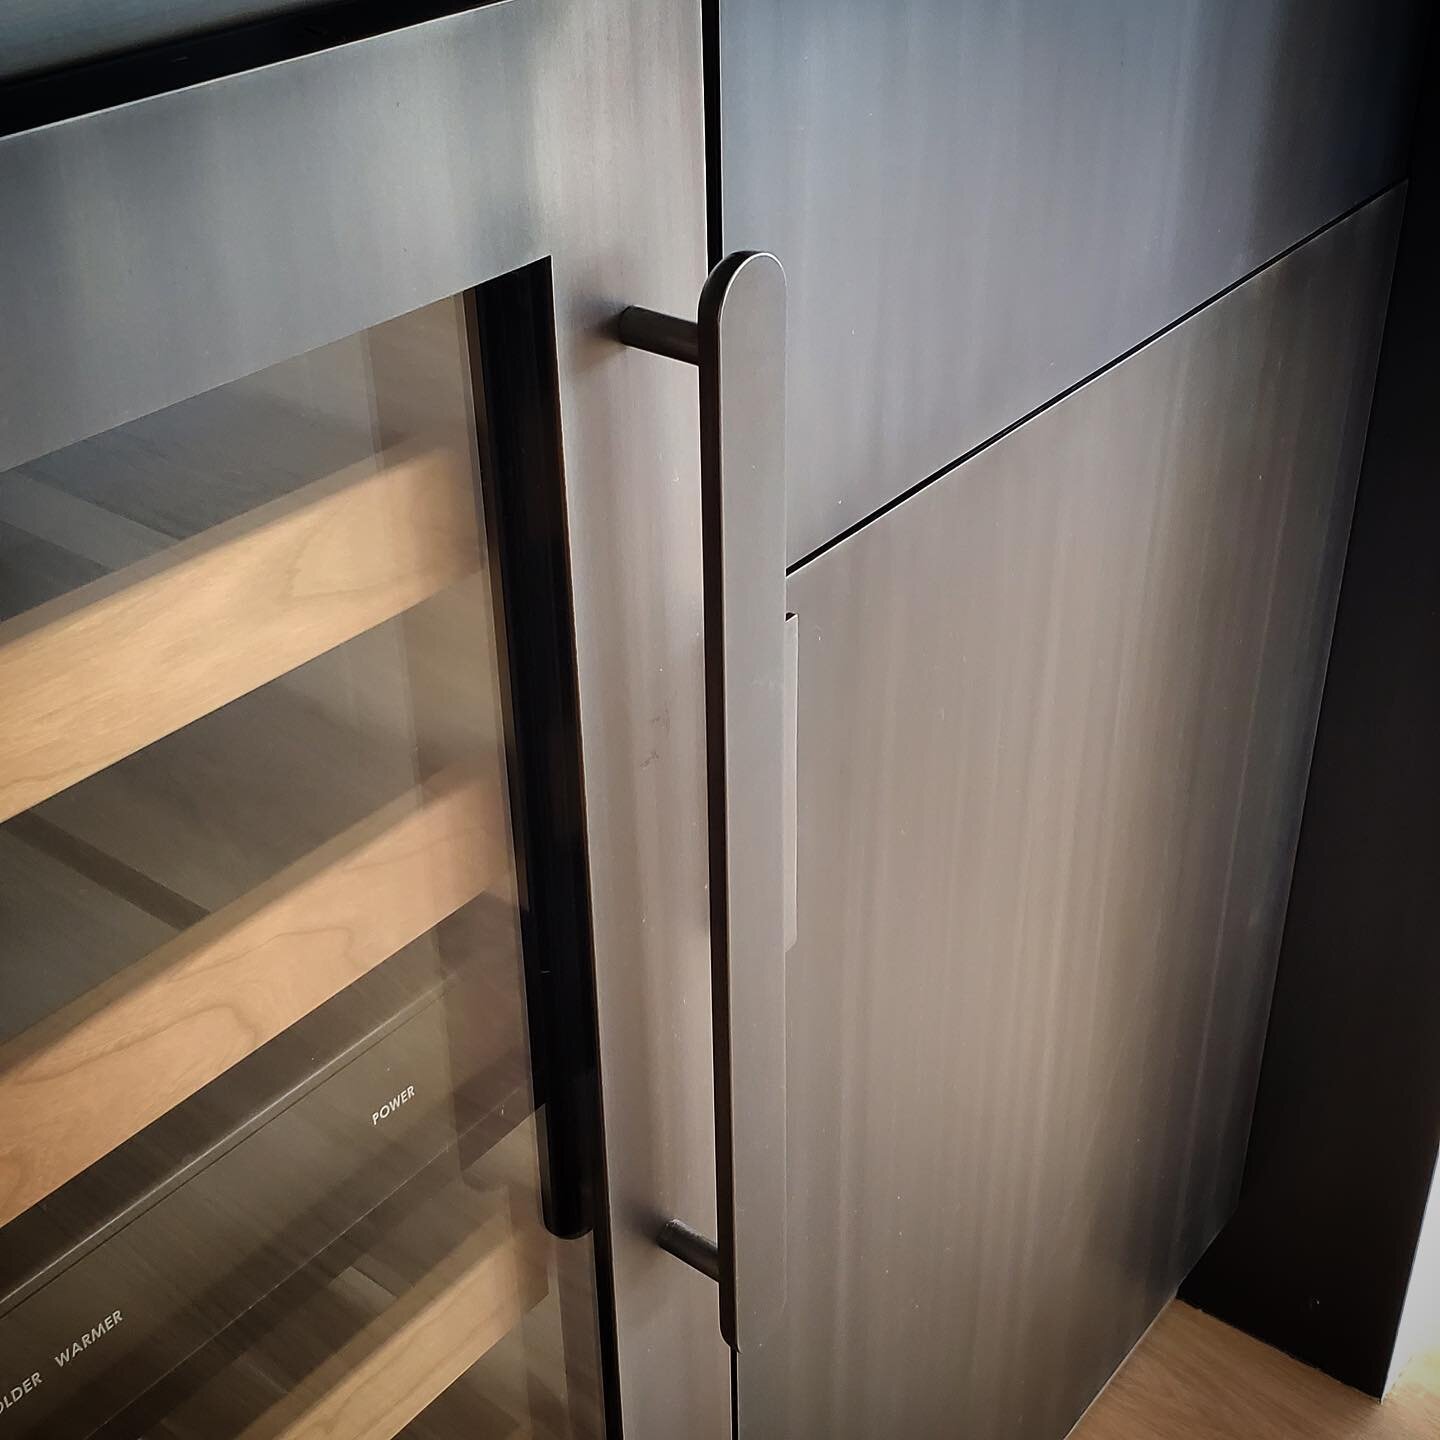 Custom appliance hardware adorn this wet bar location. As well as custom wine fridge door, cabinet cladding, countertop and back lit shelves. Scroll to see more including some of the machining. .....................
........ #wine #wet #bar #winecell